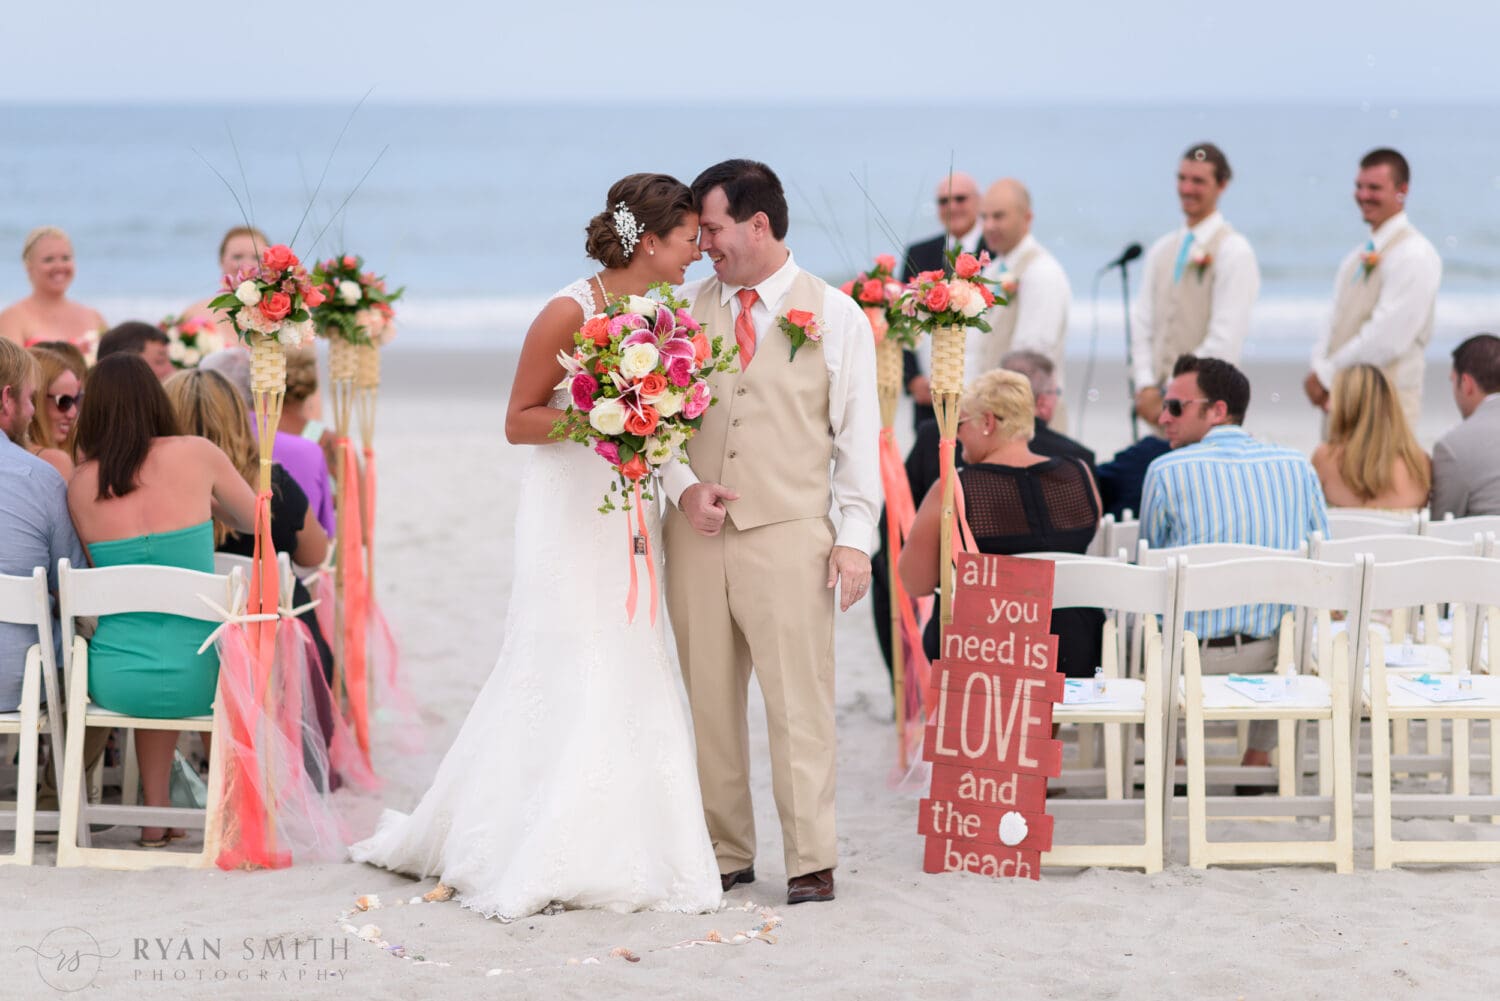 All you need is love and the beach - Grande Dunes Ocean Club